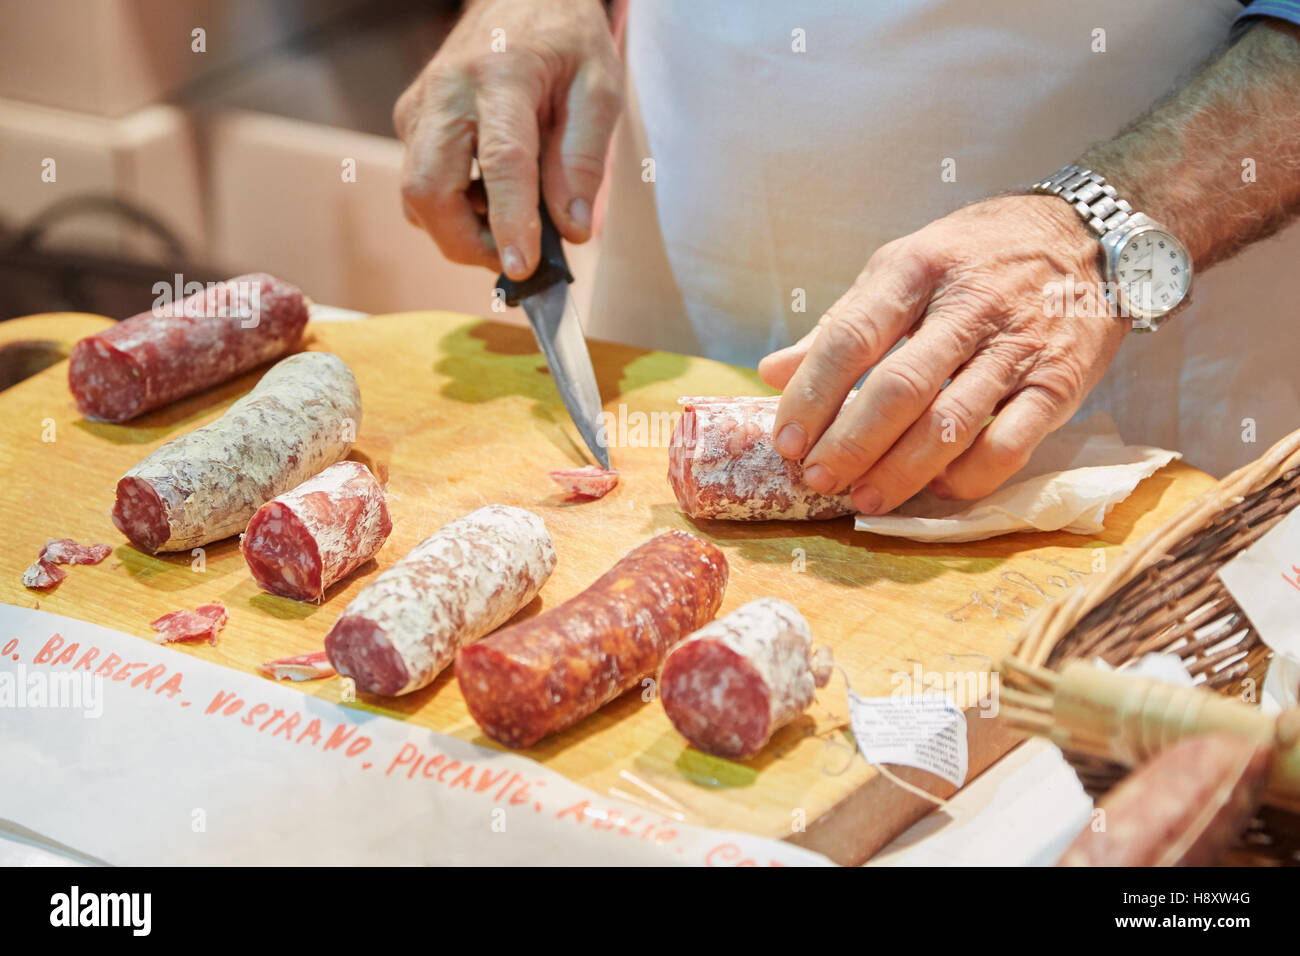 Man slicing flavored salami on sale during Alba White Truffle Fair in Alba, Italy Stock Photo